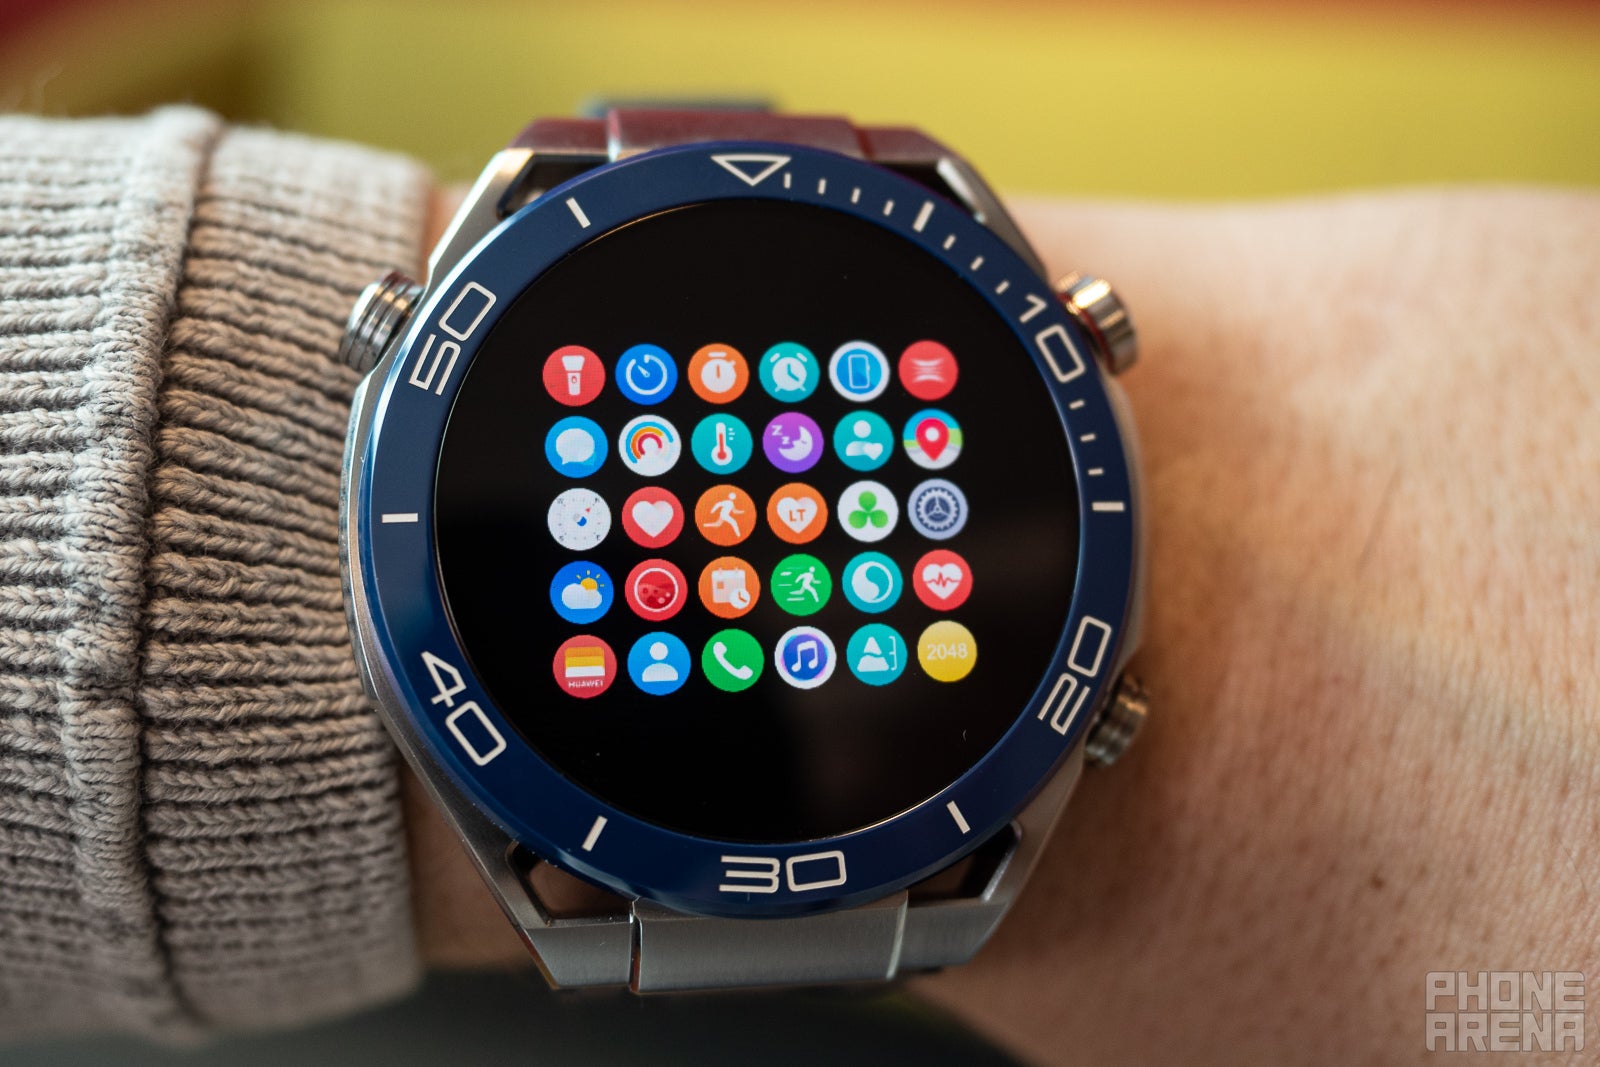 The Huawei Watch Ultimate is designed to meet even the most extreme re -  Galaxus